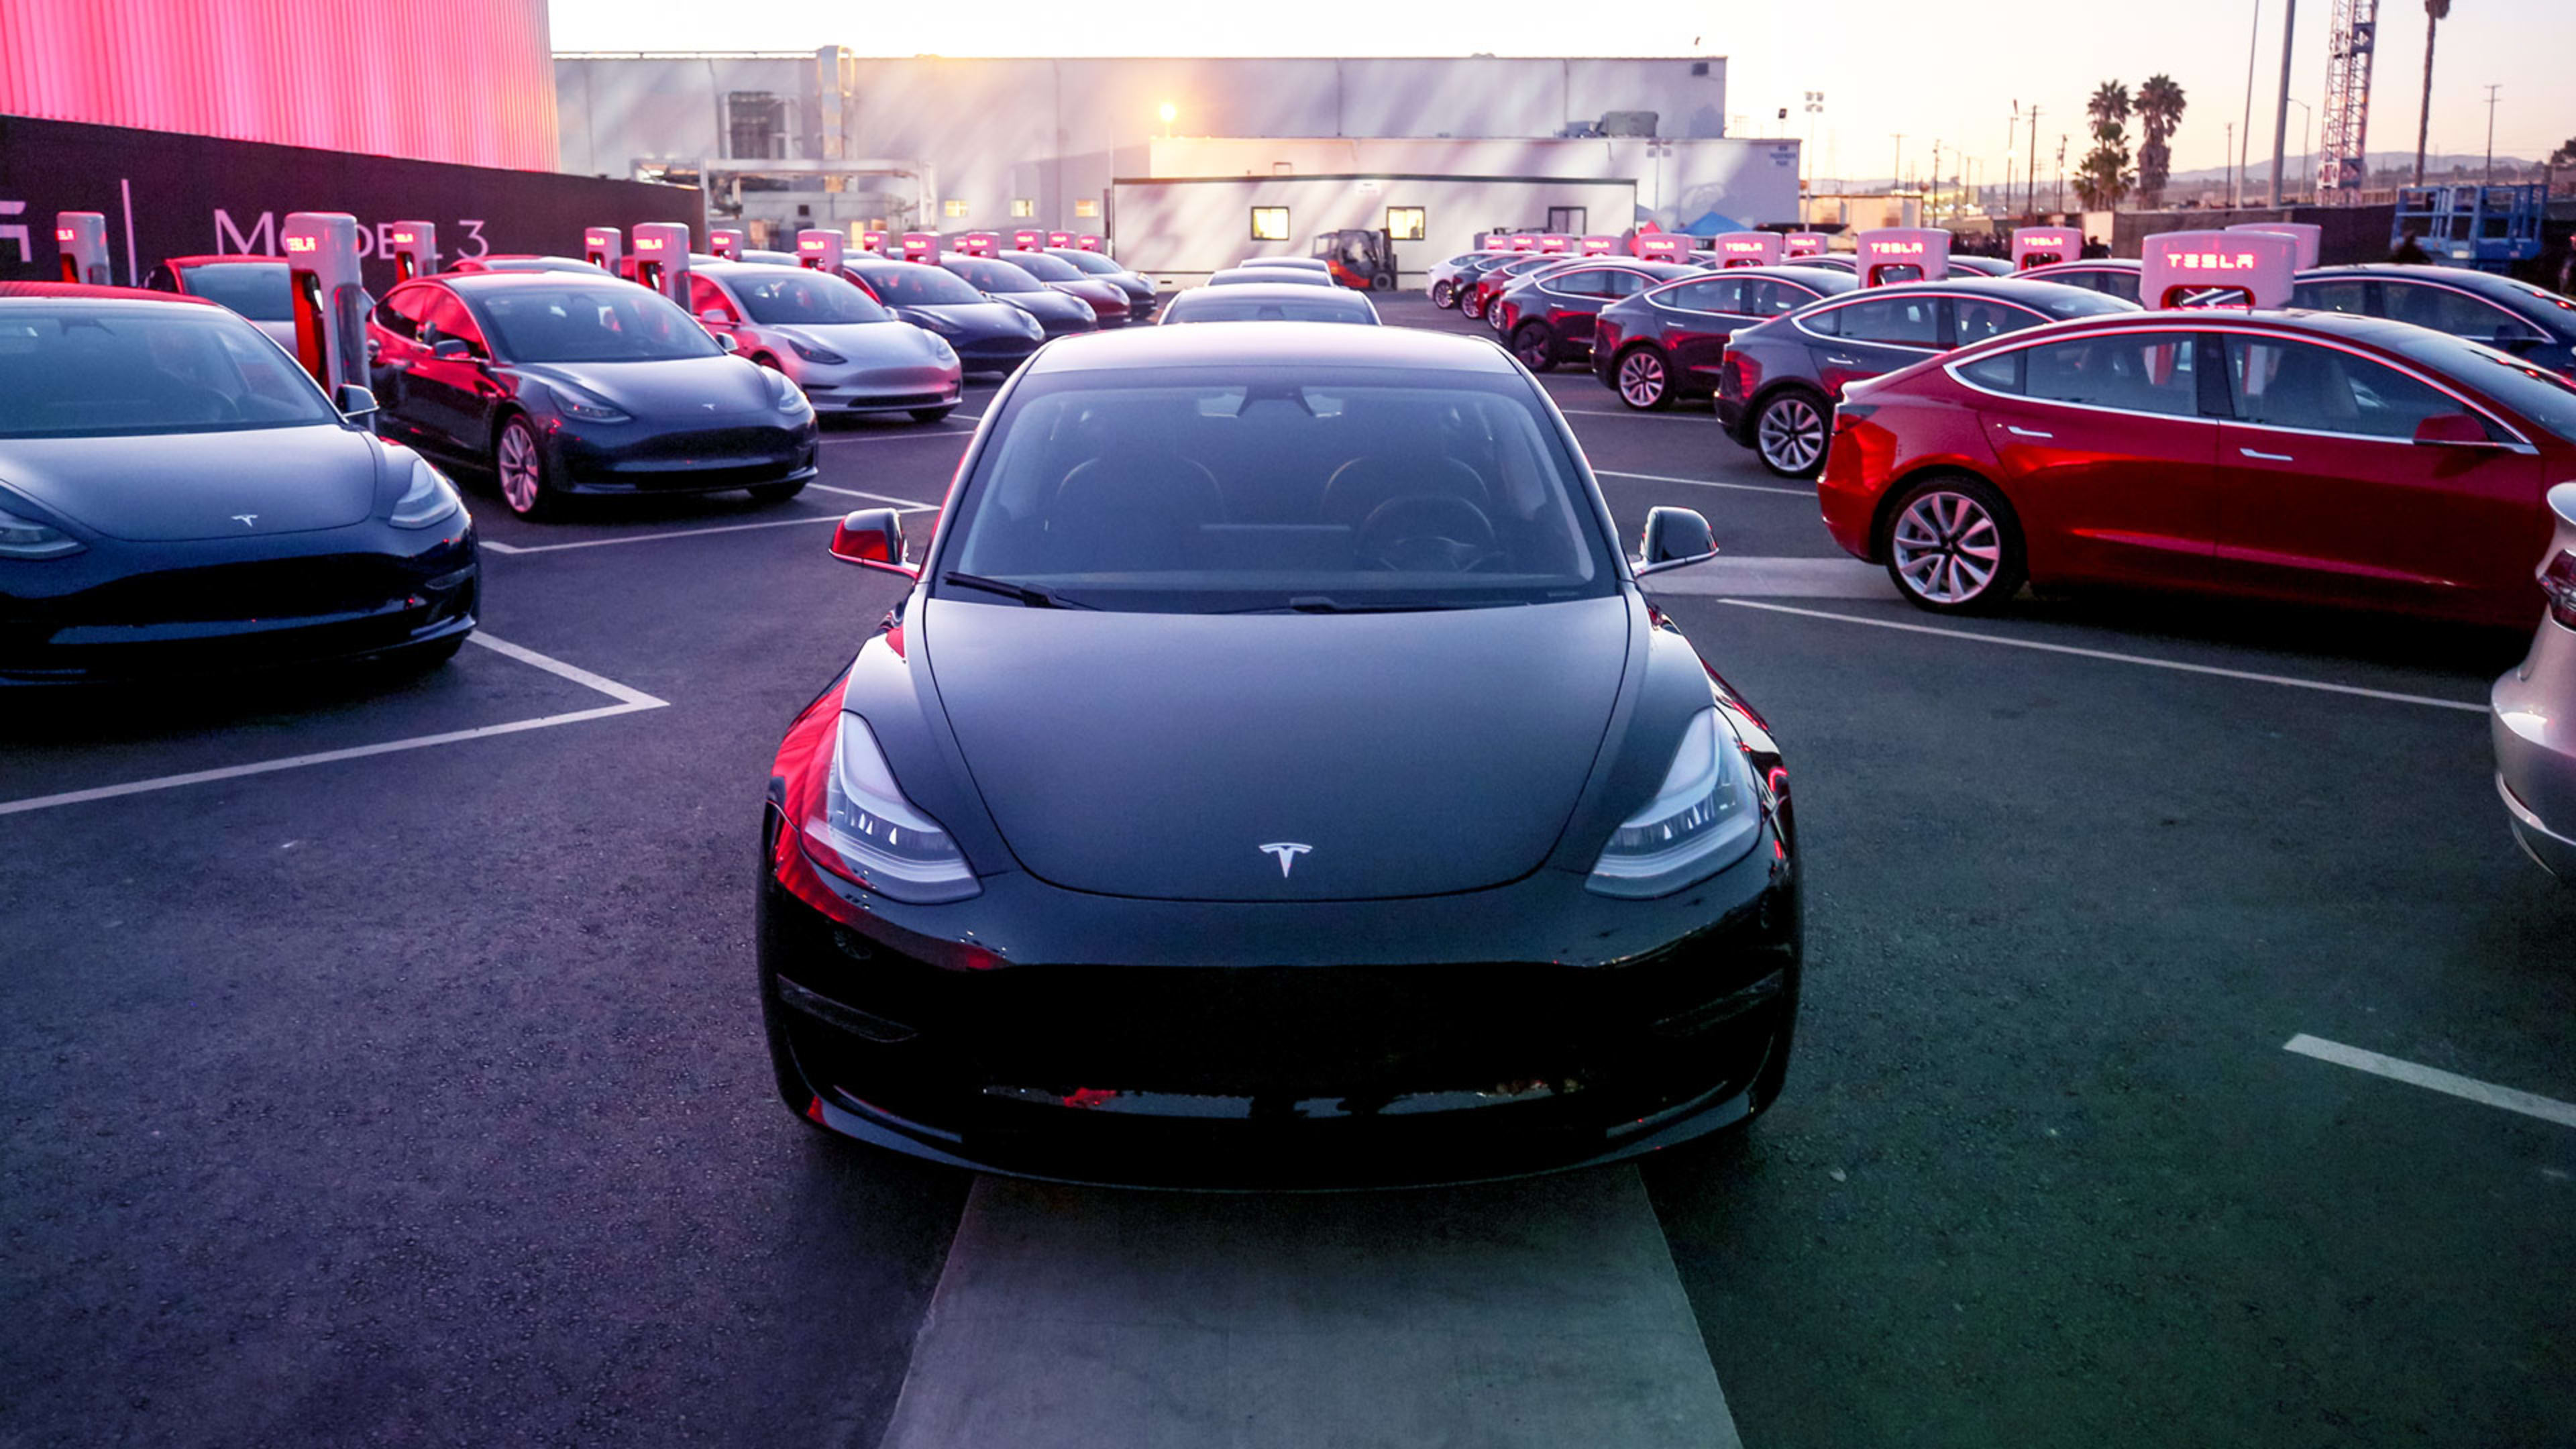 Elon Musk says you won’t be able to order the $35K Model 3 anytime soon